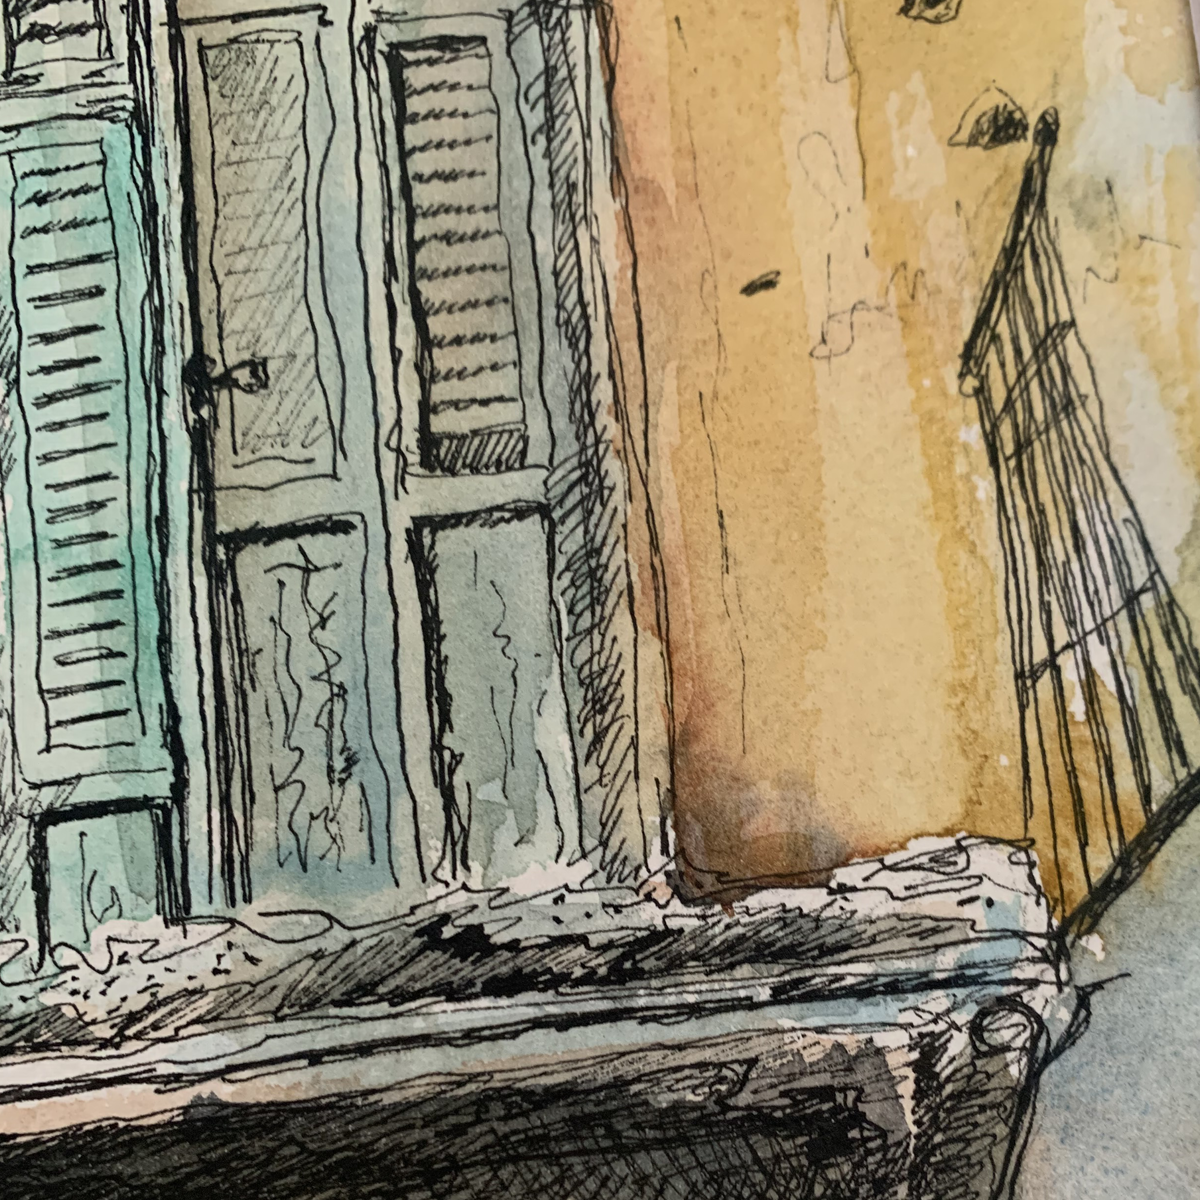 Resilience and Beauty in Imperfection: Watercolor Painting of a Broken Door in Beirut 22X30